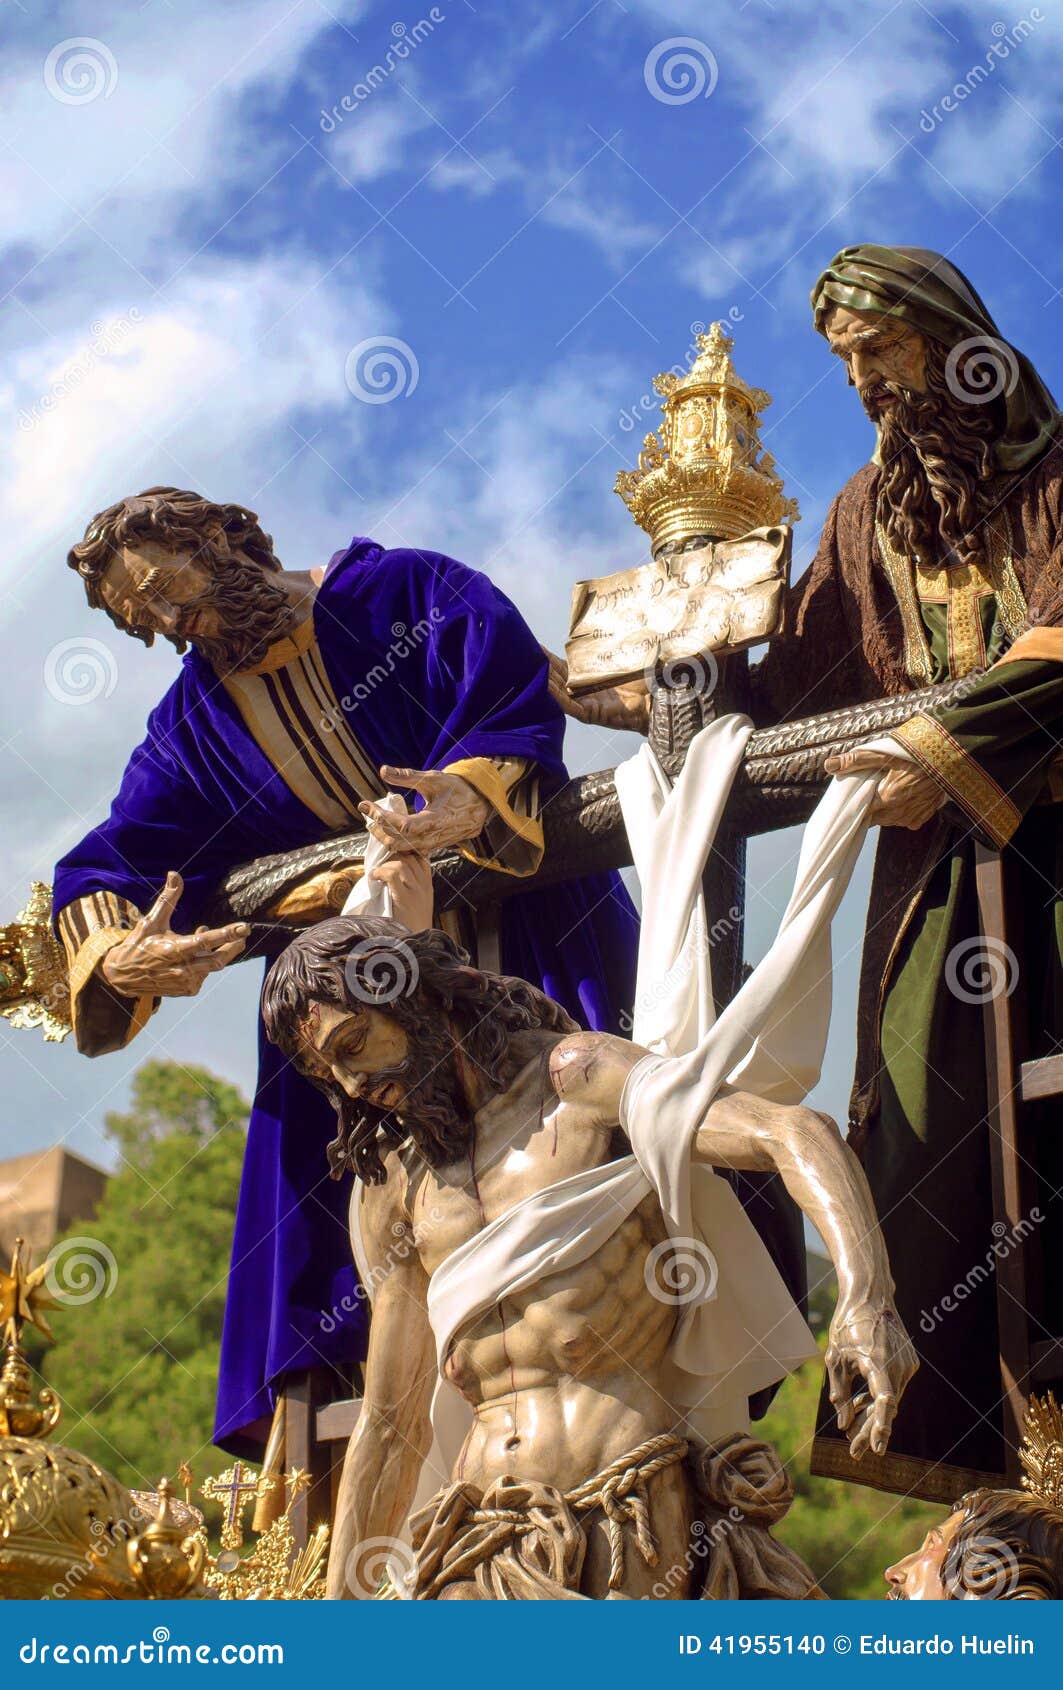 malaga, spain - april 09: traditional processions of holy week i